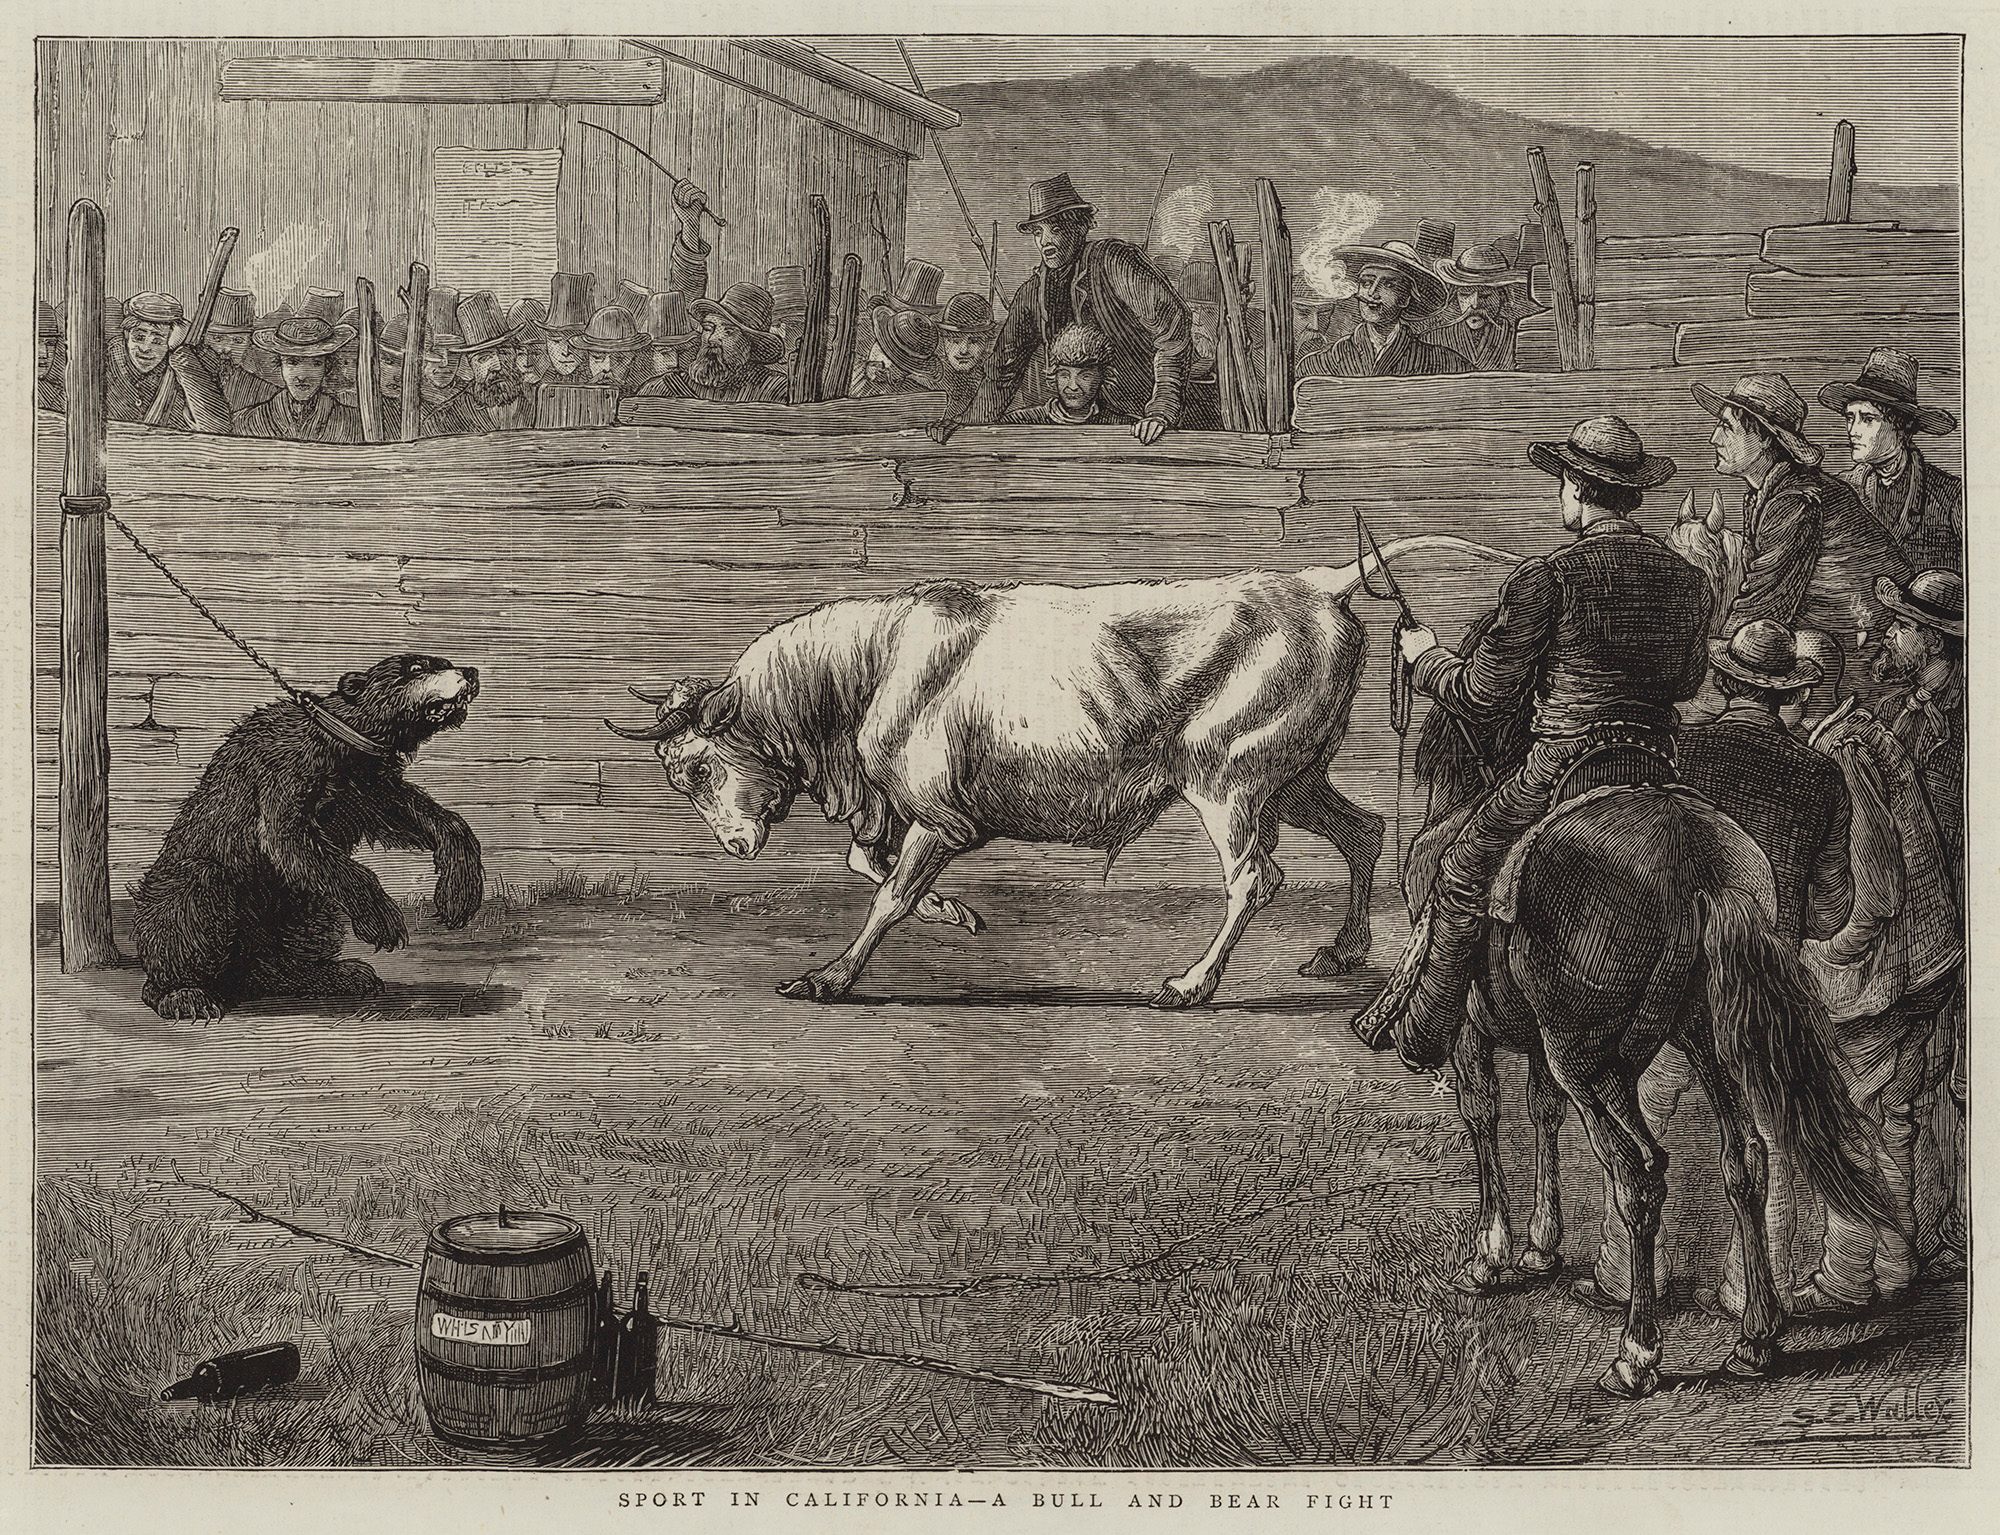 The Brutal Bull-and-Bear Fights of 19th-Century California